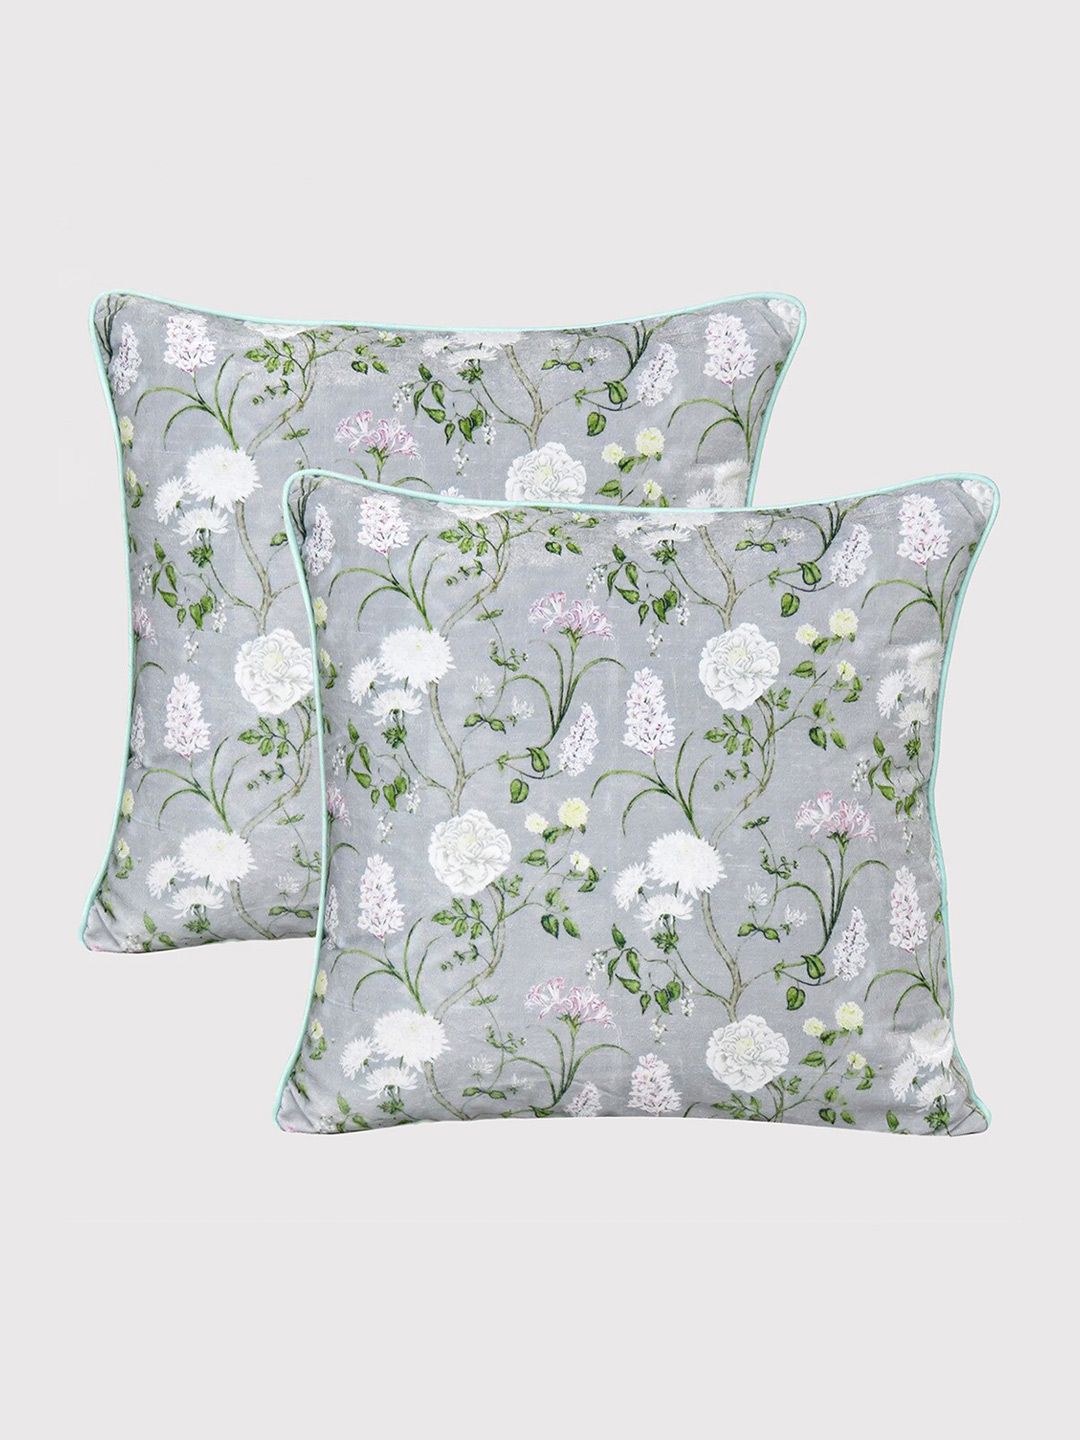 OUSSUM Grey & White Set of 2 Floral Velvet Square Cushion Covers Price in India